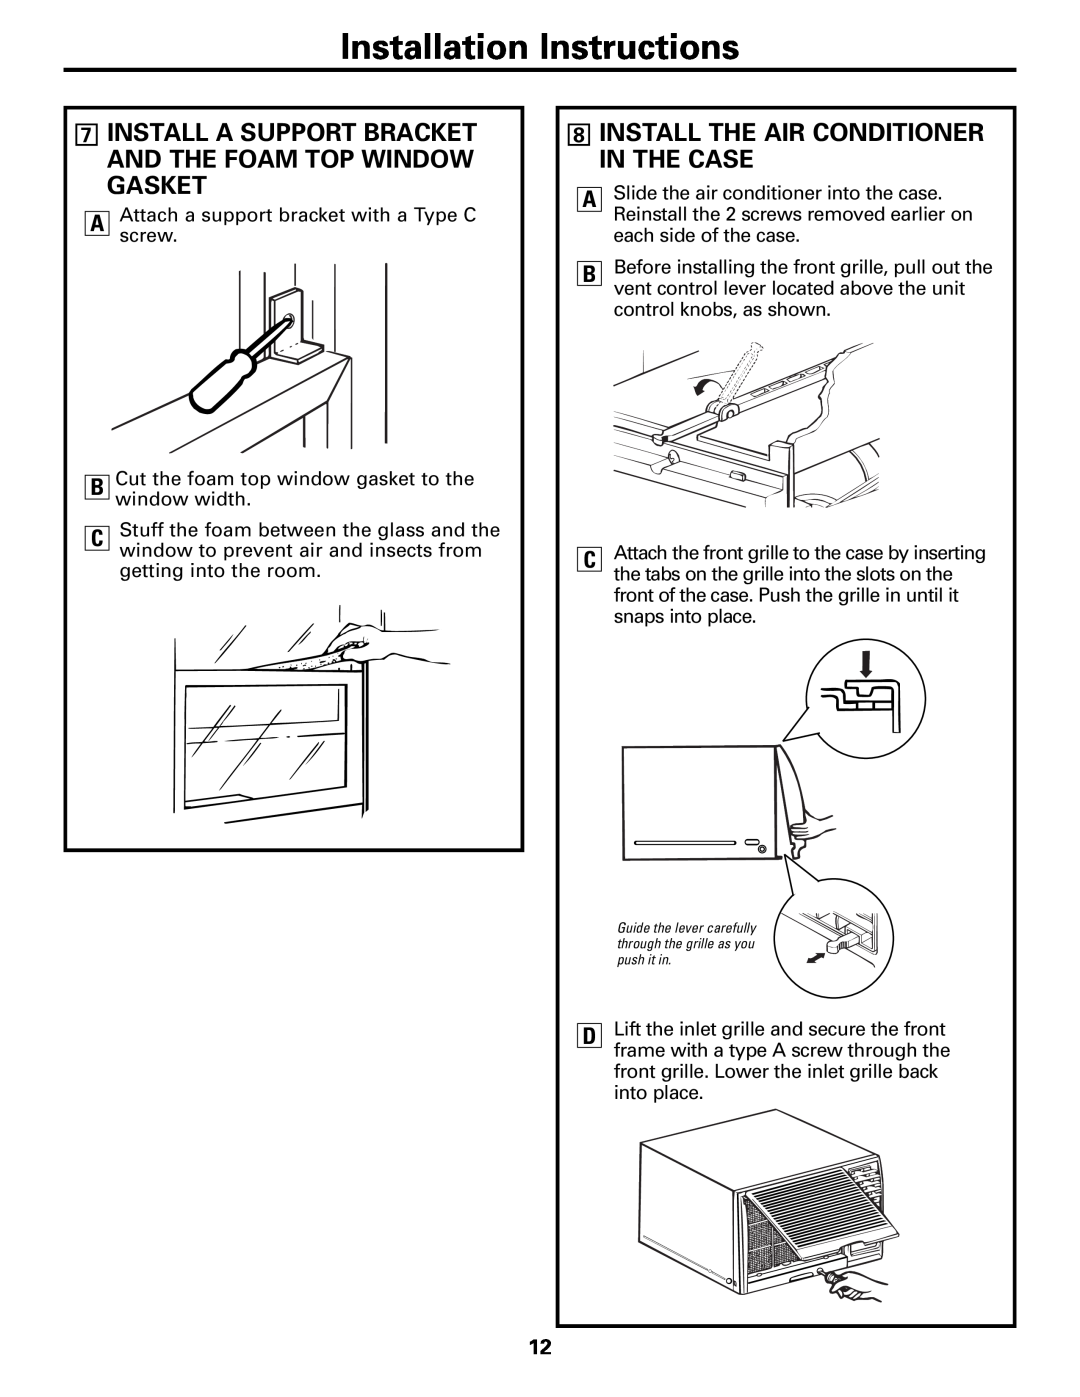 GE ASD06* operating instructions 8INSTALL THE AIR CONDITIONER IN THE CASE, Installation Instructions 